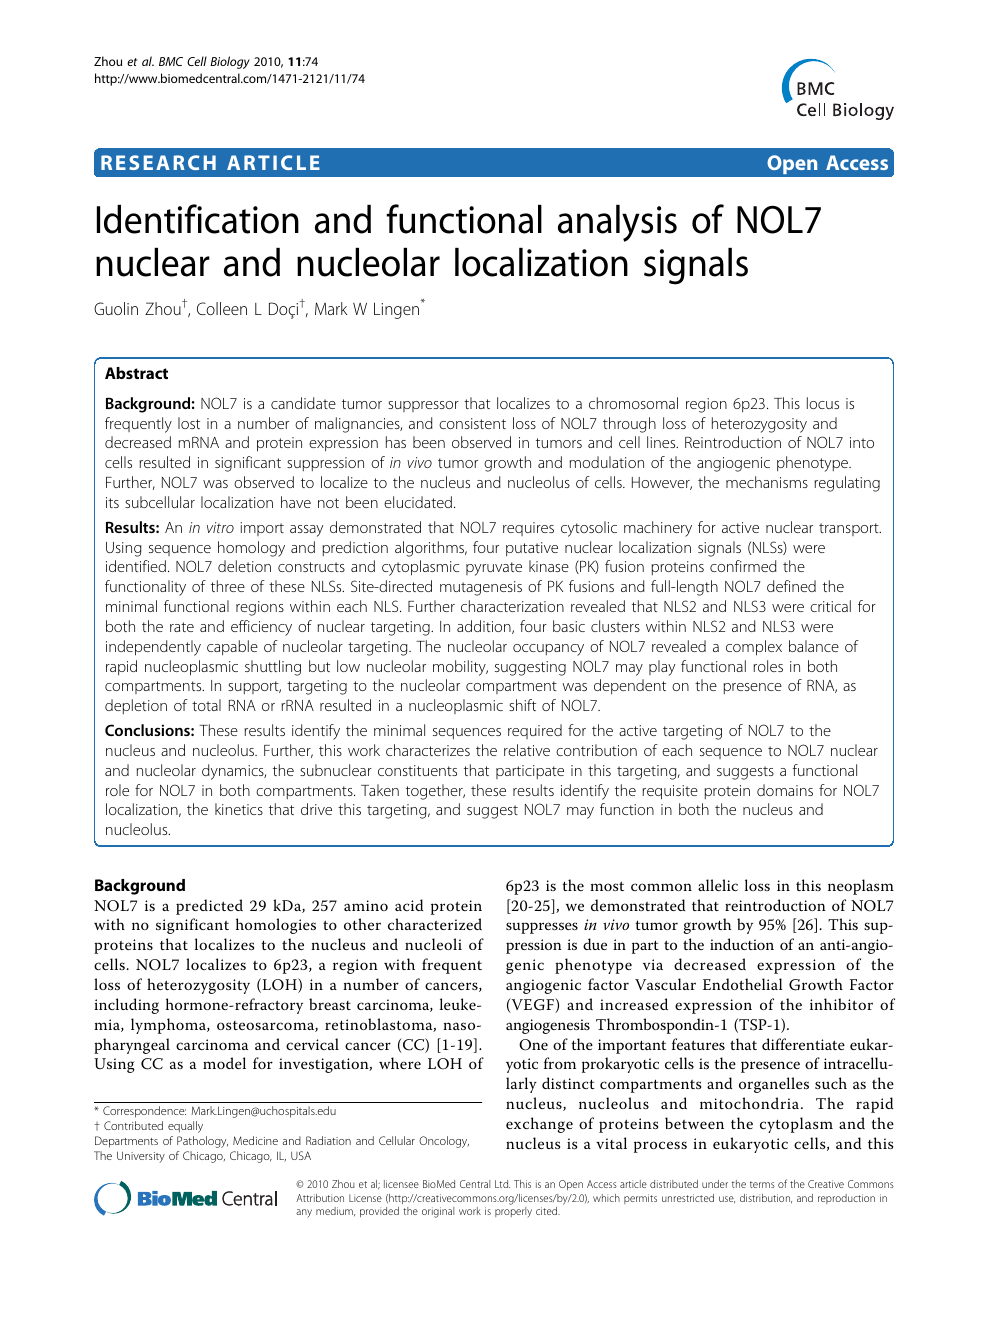 Identification And Functional Analysis Of Nol7 Nuclear And Nucleolar Localization Signals Topic Of Research Paper In Biological Sciences Download Scholarly Article Pdf And Read For Free On Cyberleninka Open Science Hub